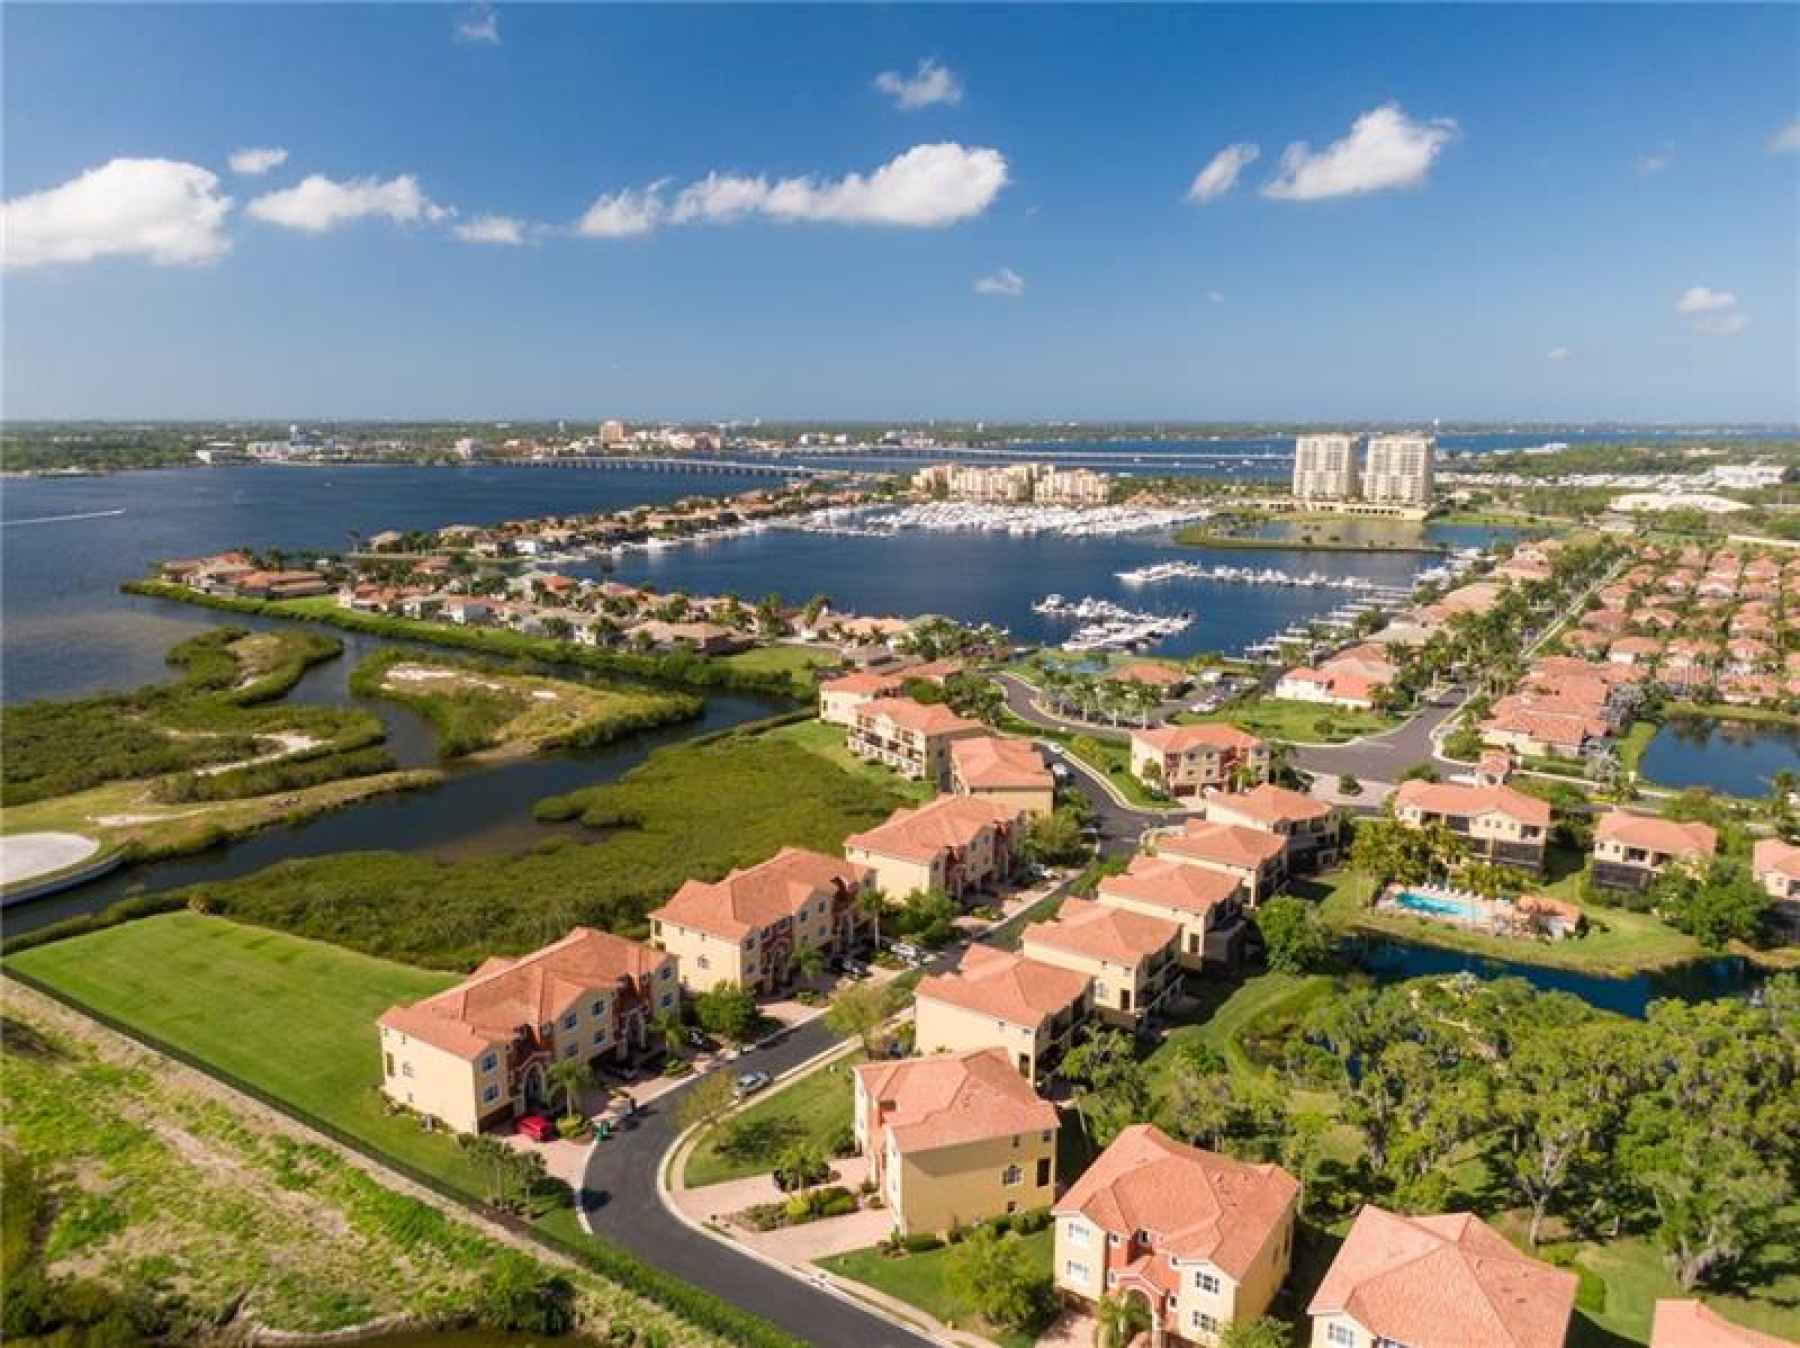 The townhome is located new docks and Manatee Bay